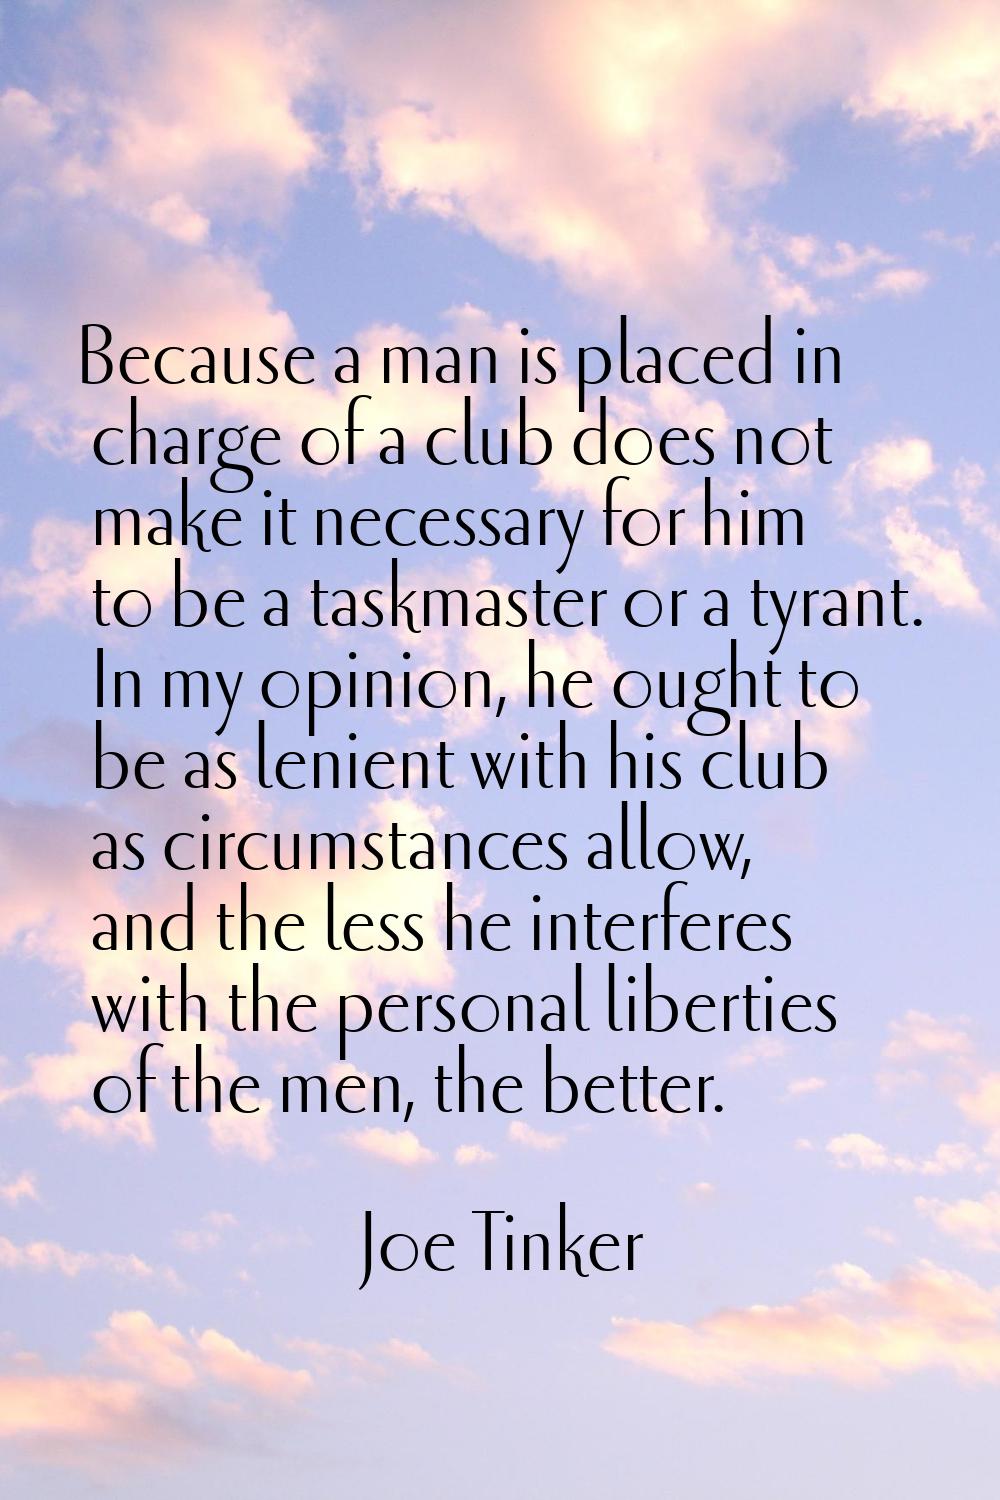 Because a man is placed in charge of a club does not make it necessary for him to be a taskmaster o